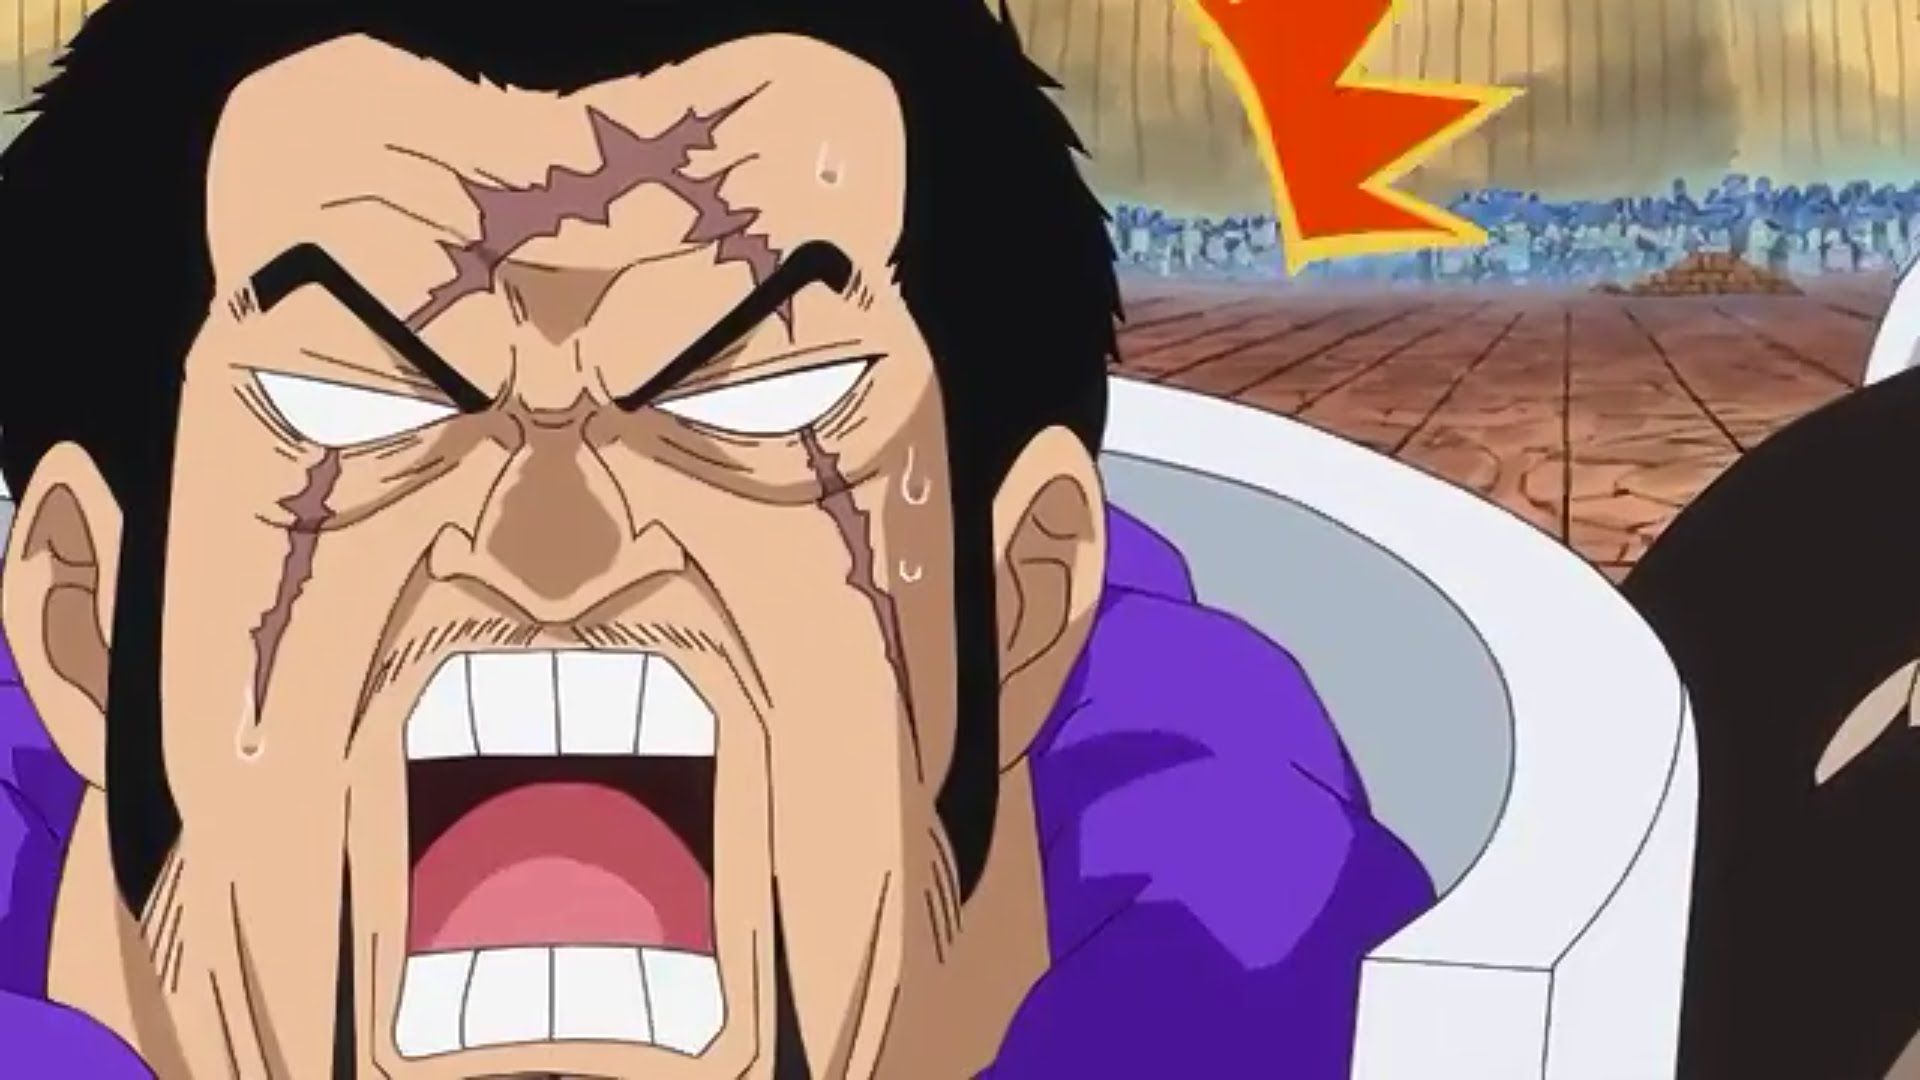 Fujitora's scarred face, mouth wide open in disbelief